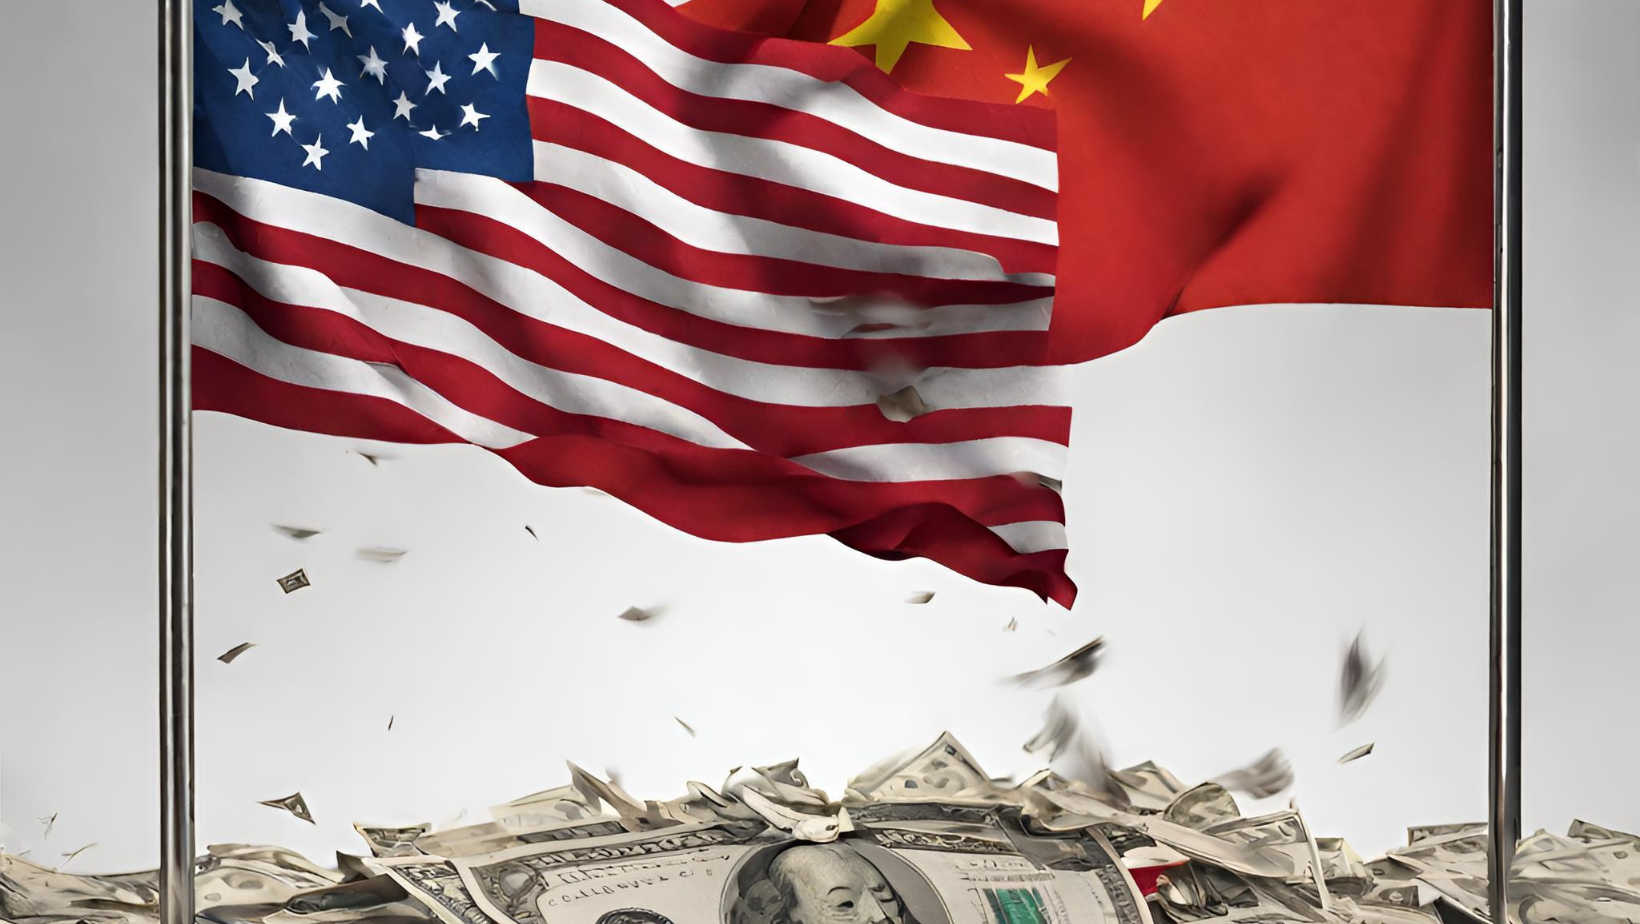 US and China flags with dollar bills